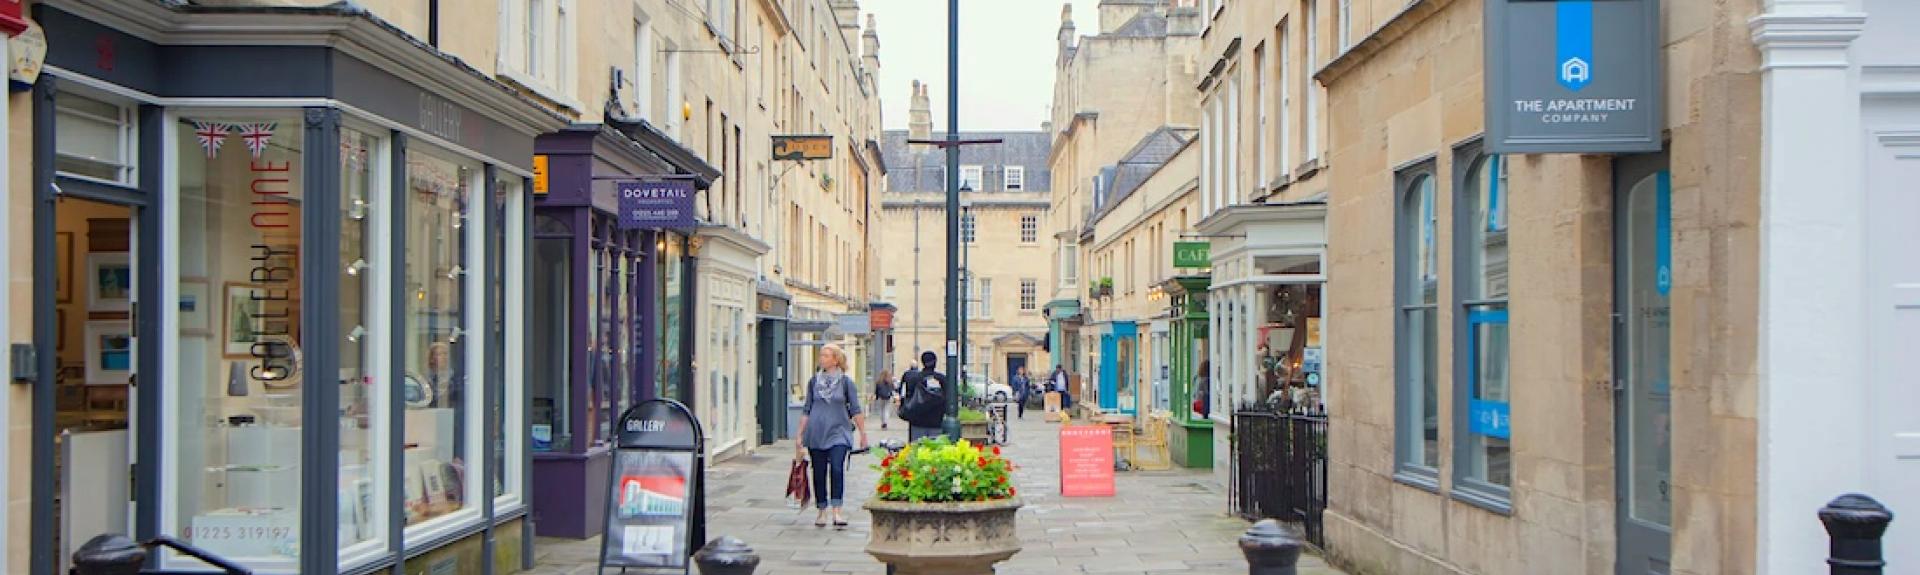 A pedestrianised Georgian street with lamp posts and floral displays down its centre bordered by trendy 3-storey houses and shops bult of Bath stone